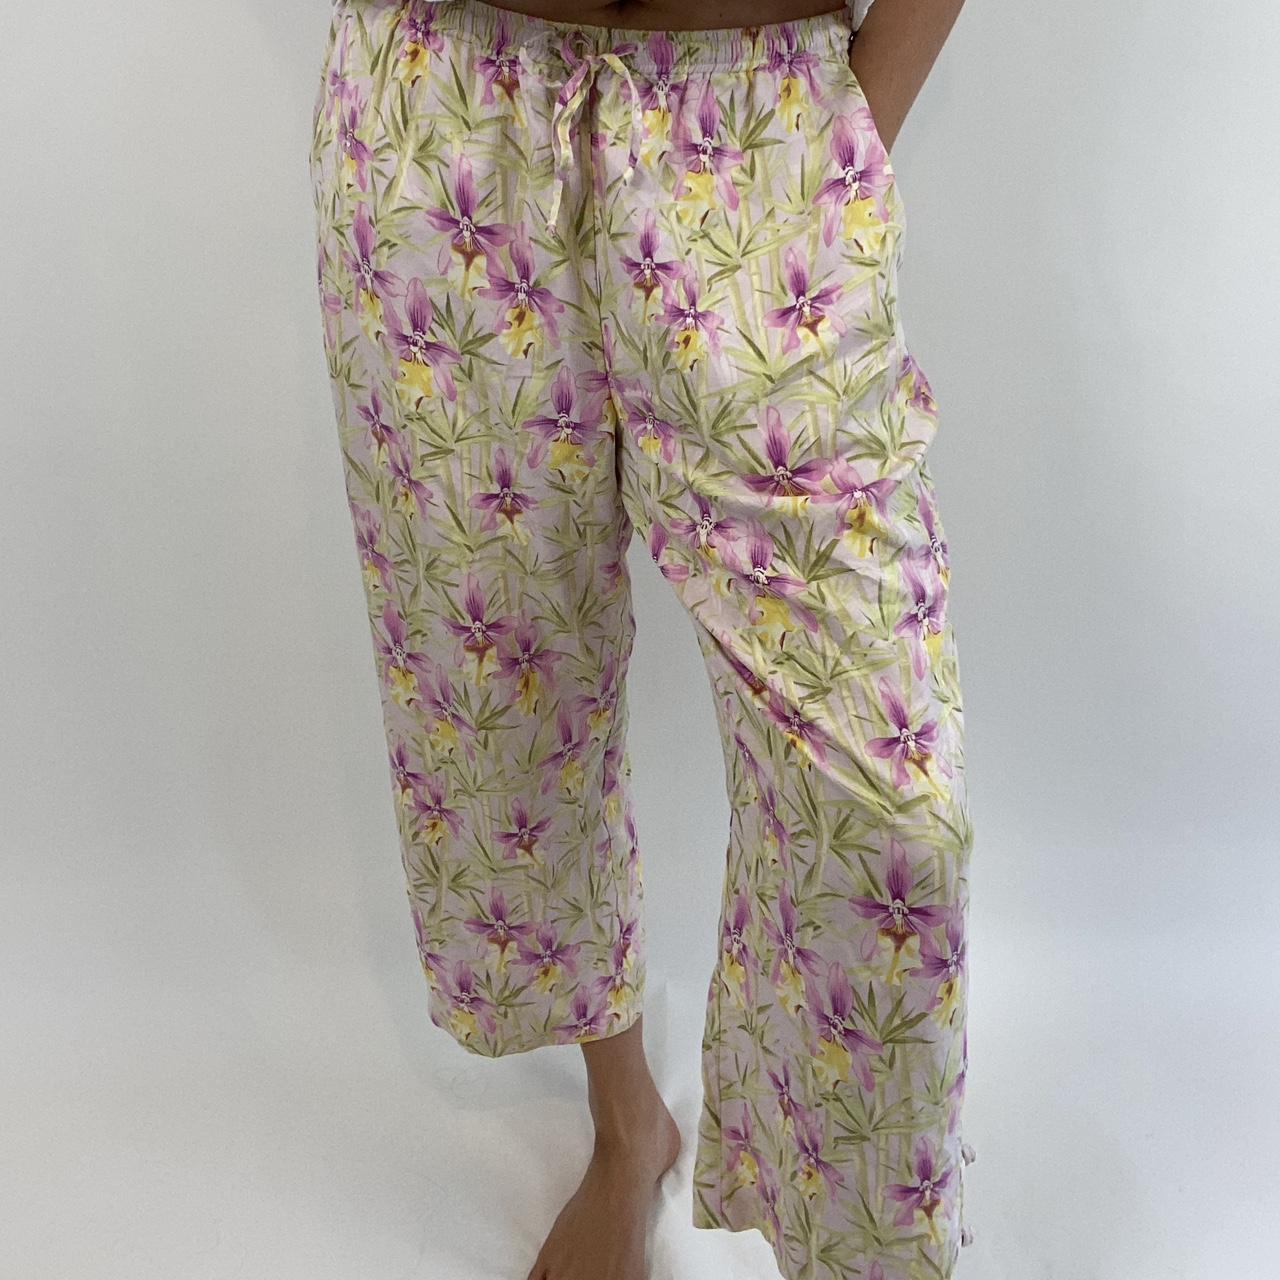 Tommy Bahama floral pants, Super pretty pattern